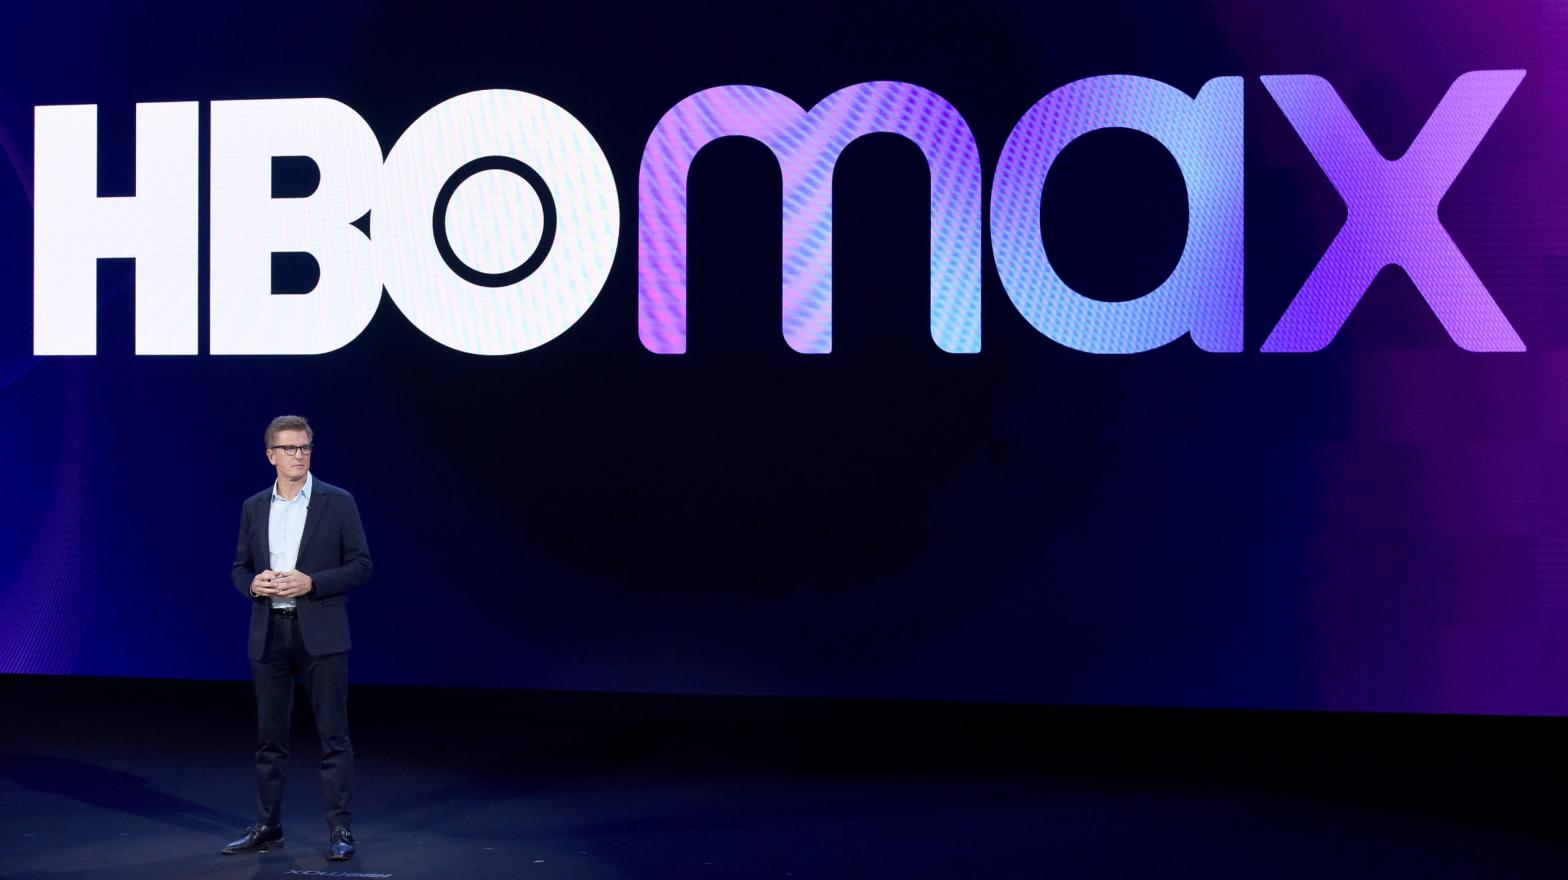 Kevin Reilly, Content Officer of HBO Max and President of TNT, TBS, & TruTV, speaks onstage at HBO Max WarnerMedia Investor Day Presentation at Warner Bros. Studios on October 29, 2019 in Burbank, California.  (Photo: Presley Ann, Getty Images)